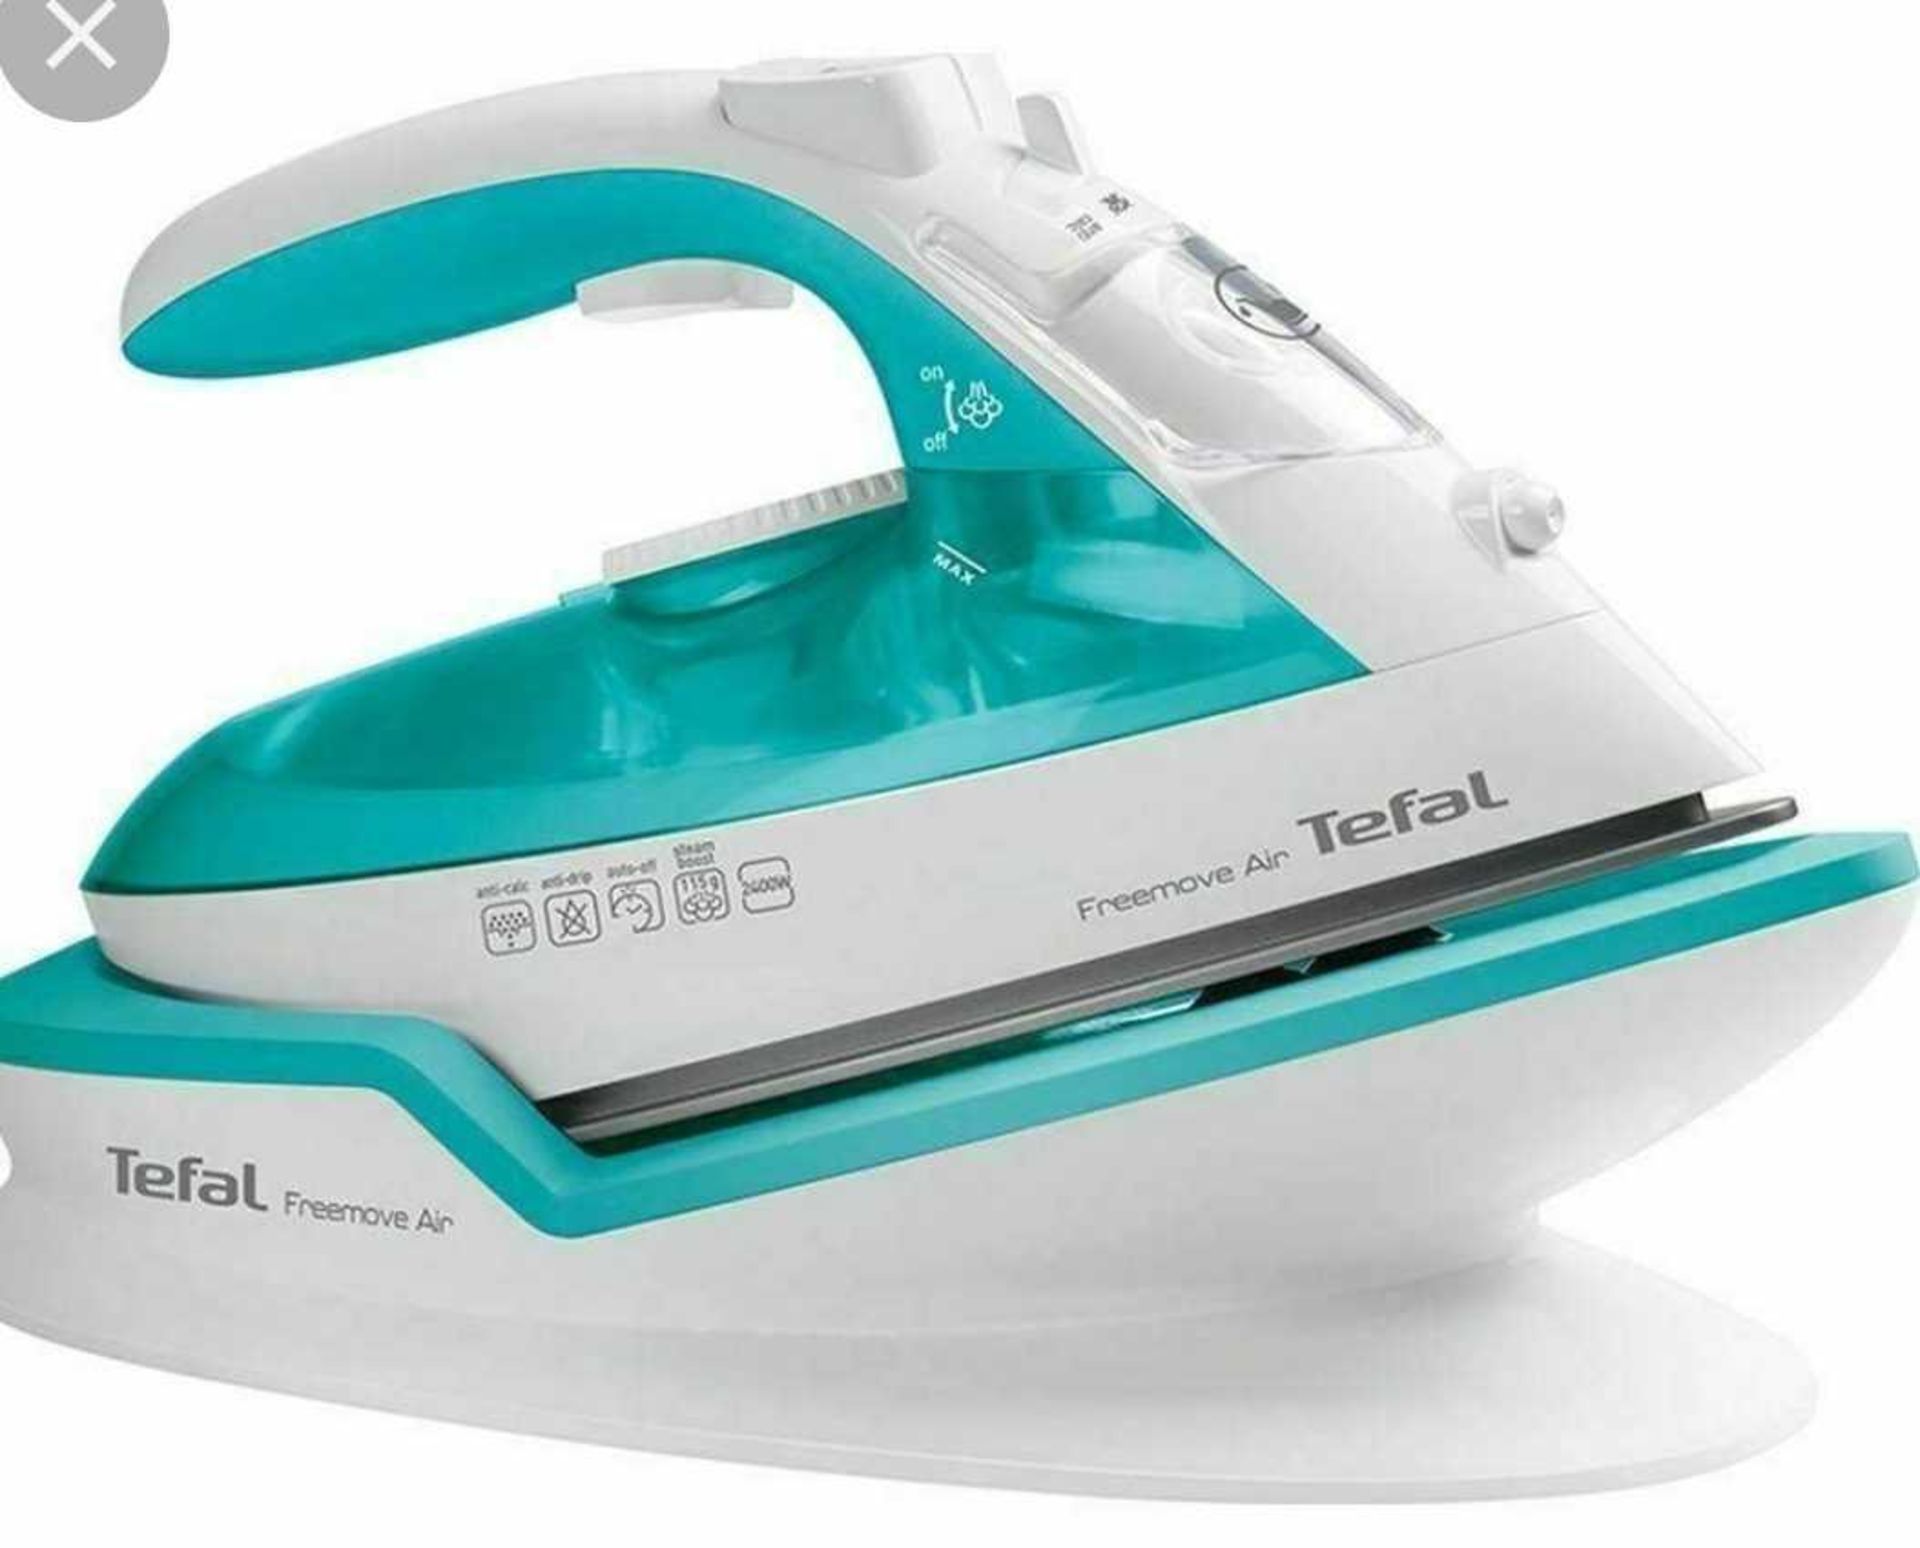 RRP £85 Boxed Tefal Freemove Air Steam Iron - Image 2 of 4